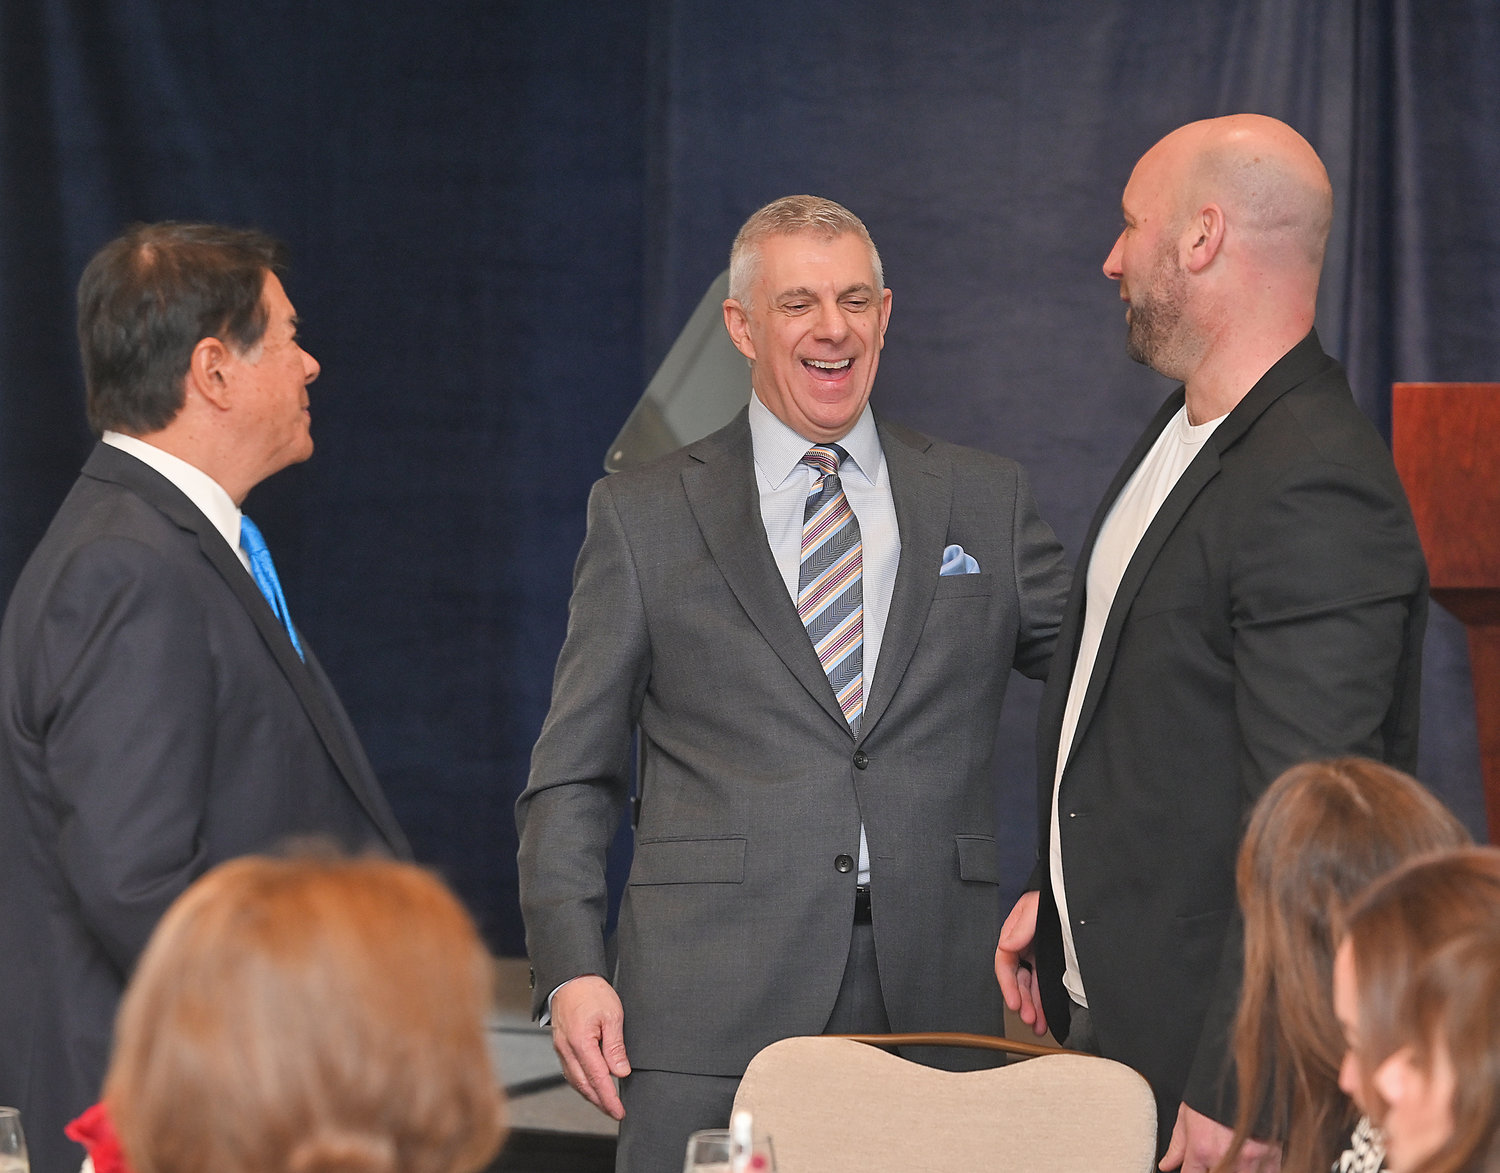 PARTNERS IN PROGRESS — Oneida County Executive Anthony J. Picente Jr. speaks with Oneida Indian Nation Representative Ray Halbritter and the president of the Utica Comets and Mohawk Valley Garden Robert Esche before the start of Picente’s State of the County address at the Turning Stone Resort &amp; Casino on Wednesday. Halbritter and Esche, along with Munson-Williams-Proctor Arts Institute President and CEO Anna D’Ambrosio; and Savneet Singh, president and CEO of PAR Technology, will spearhead the county’s redevelopment district project in Utica.